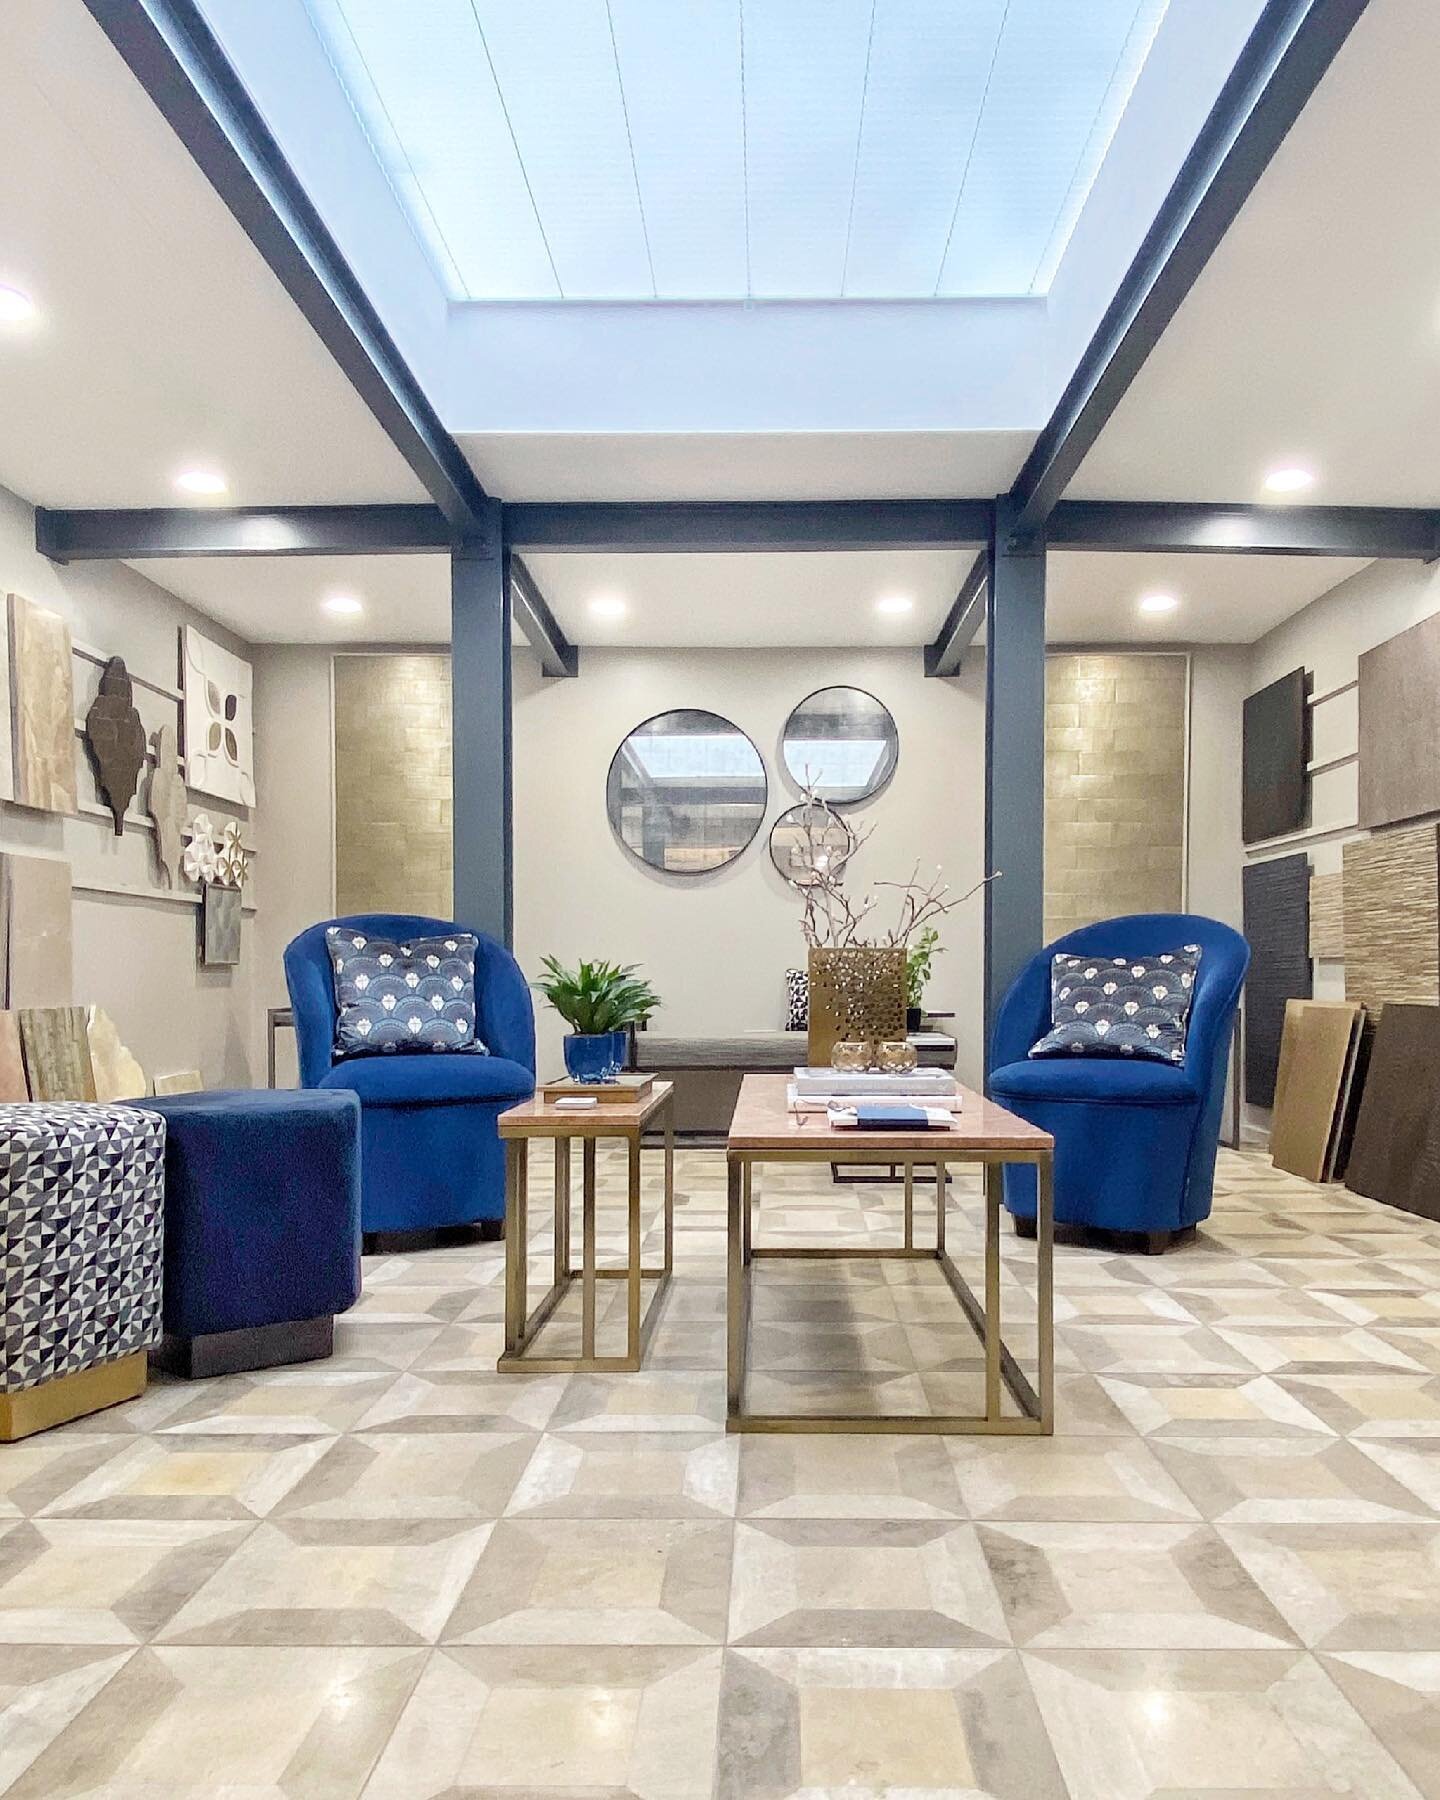 Get a closer look of our beautiful and unique collections of surface materials at our King&rsquo;s Road showroom. Get inspired by our combinations from the rarest marble and stone to precious metals, shells and glass. #DecorumEstLondon #ChelseaLondon